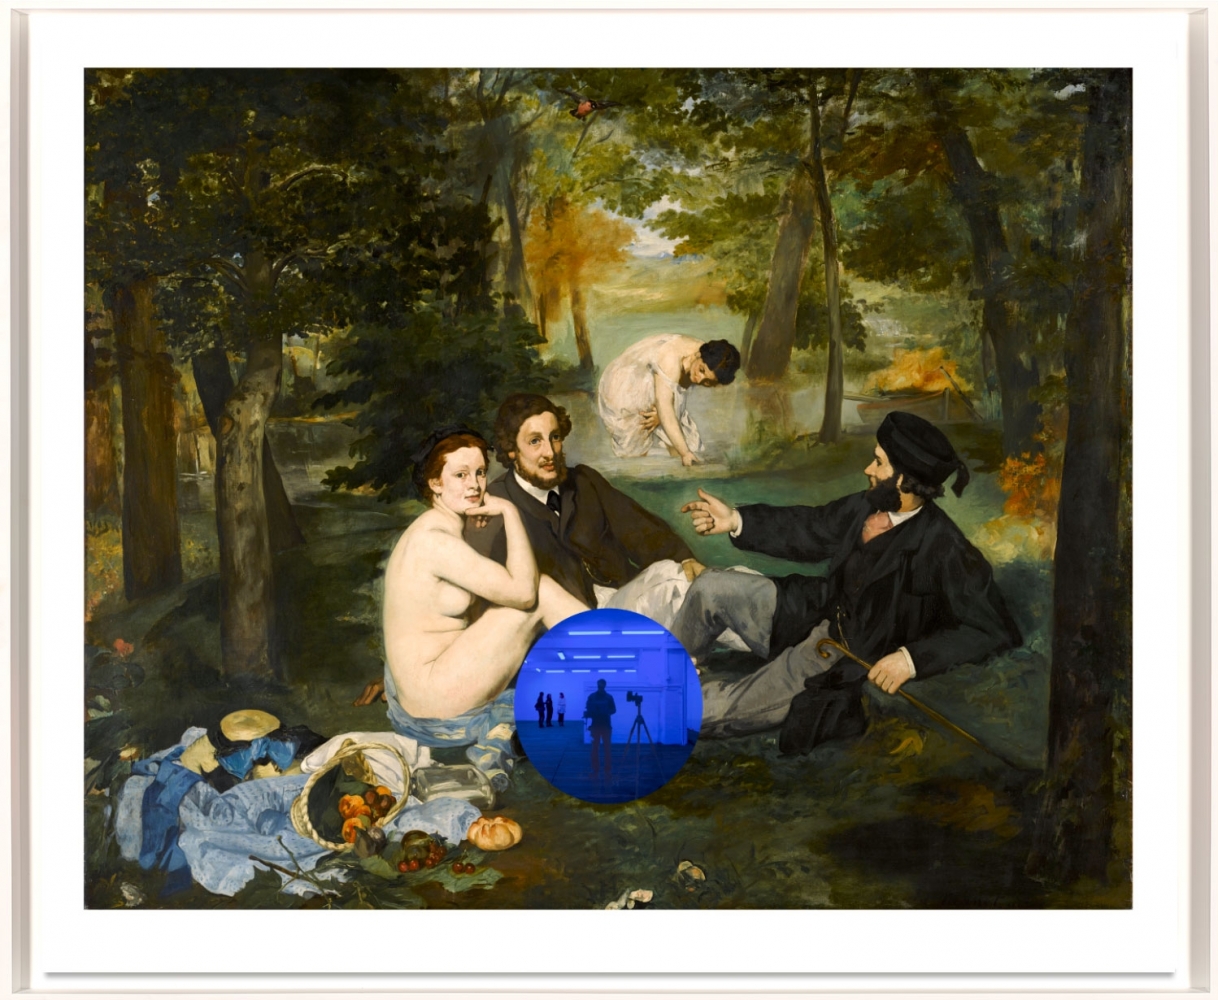 Gazing Ball (Manet Luncheon on the Grass), 2019
Archival Pigment Print on Innova rag paper, glass
39 1/16 x 48 inches
Edition of 20